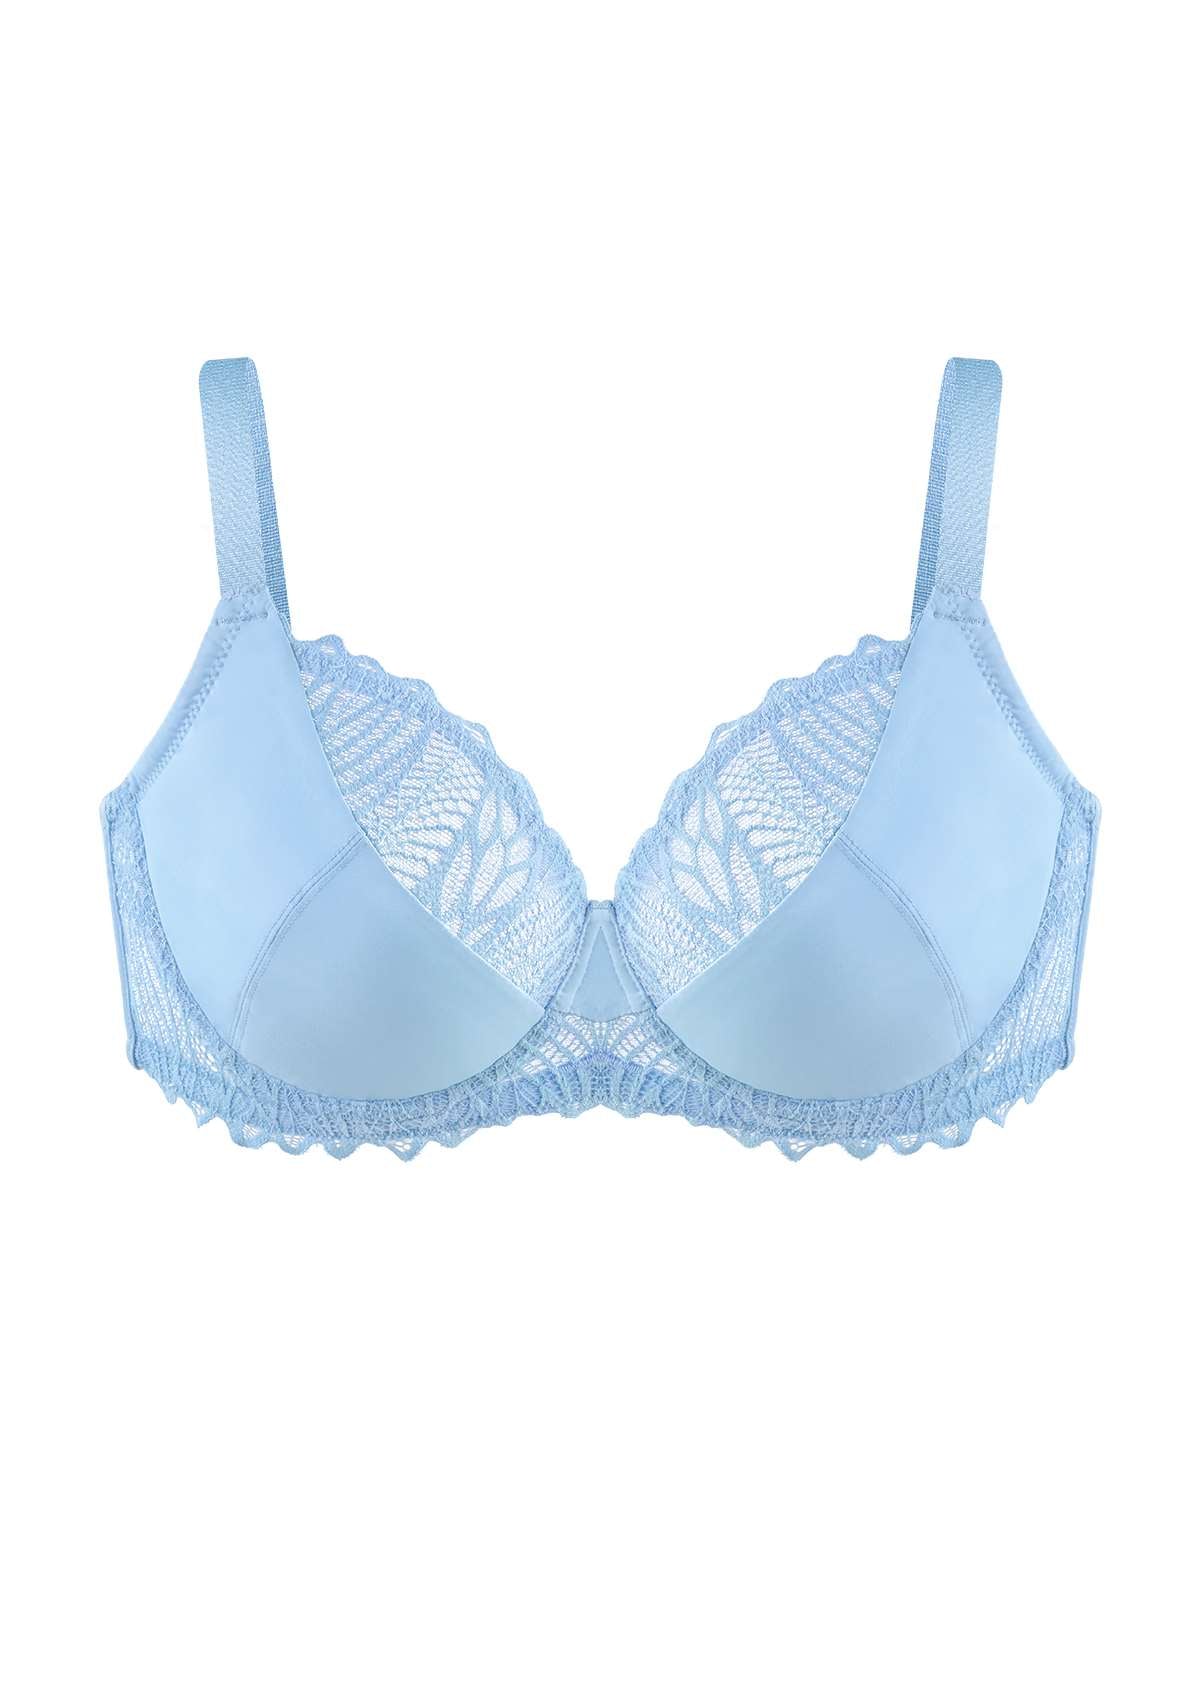 HSIA Pretty Secrets Lace-Trimmed Full Coverage Underwire Bra For Support - Light Blue / 36 / D